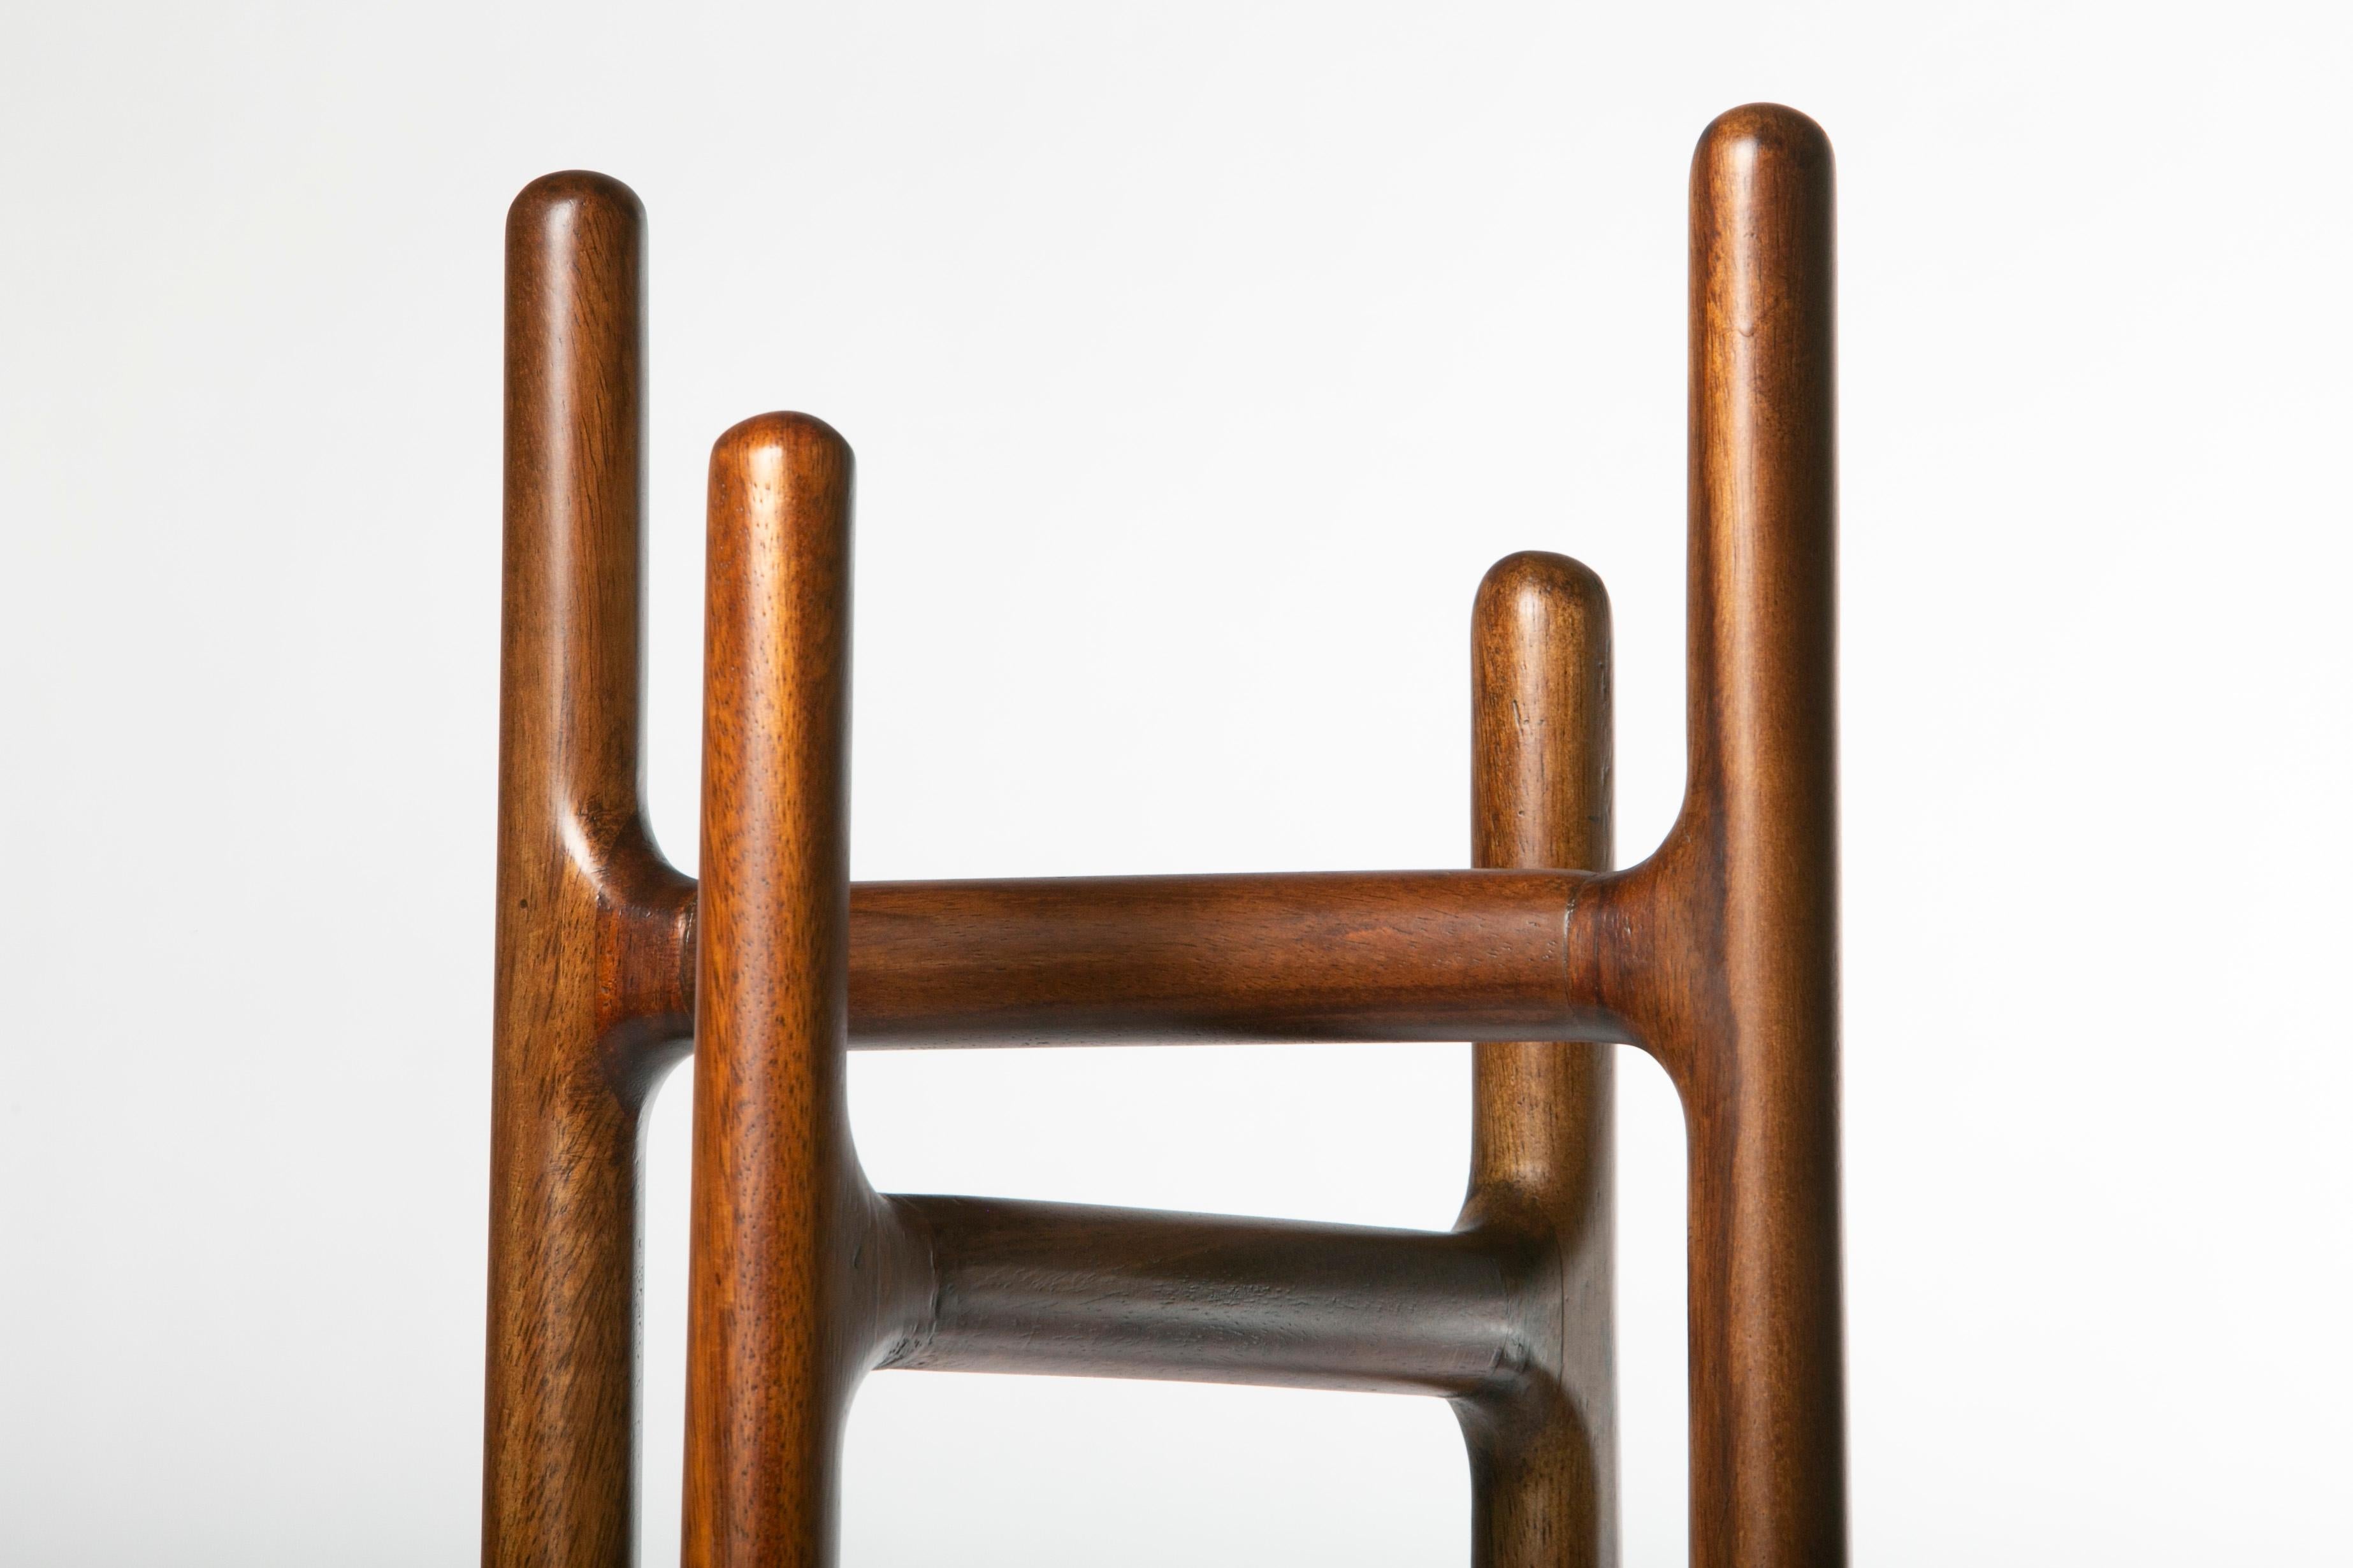 Wood Desierto Coat rack, parota wood, Contemporary Mexican Design by Juskani Alonso For Sale